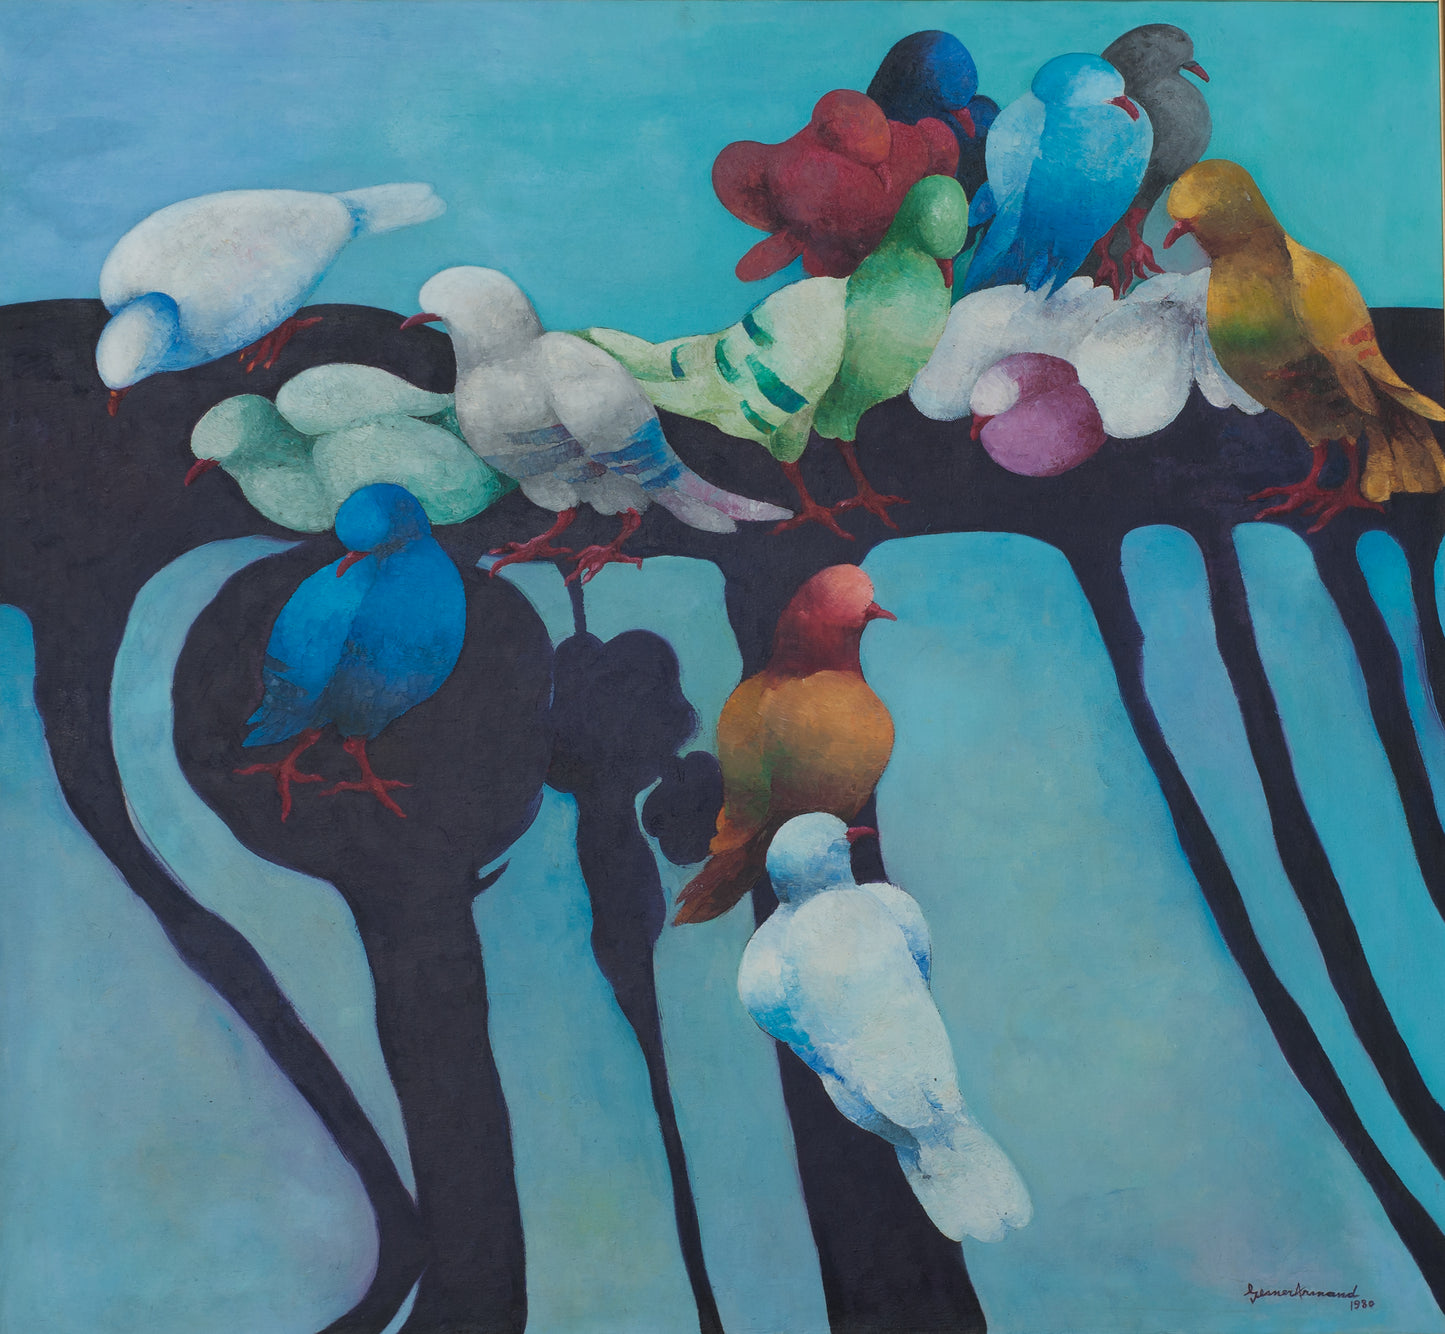 Gesner Armand (1936-2008) 32"x34" Pigeons on a Tree 1980 Oil on Canvas Painting #XGSN-Fondation Marie & Georges S. Nader